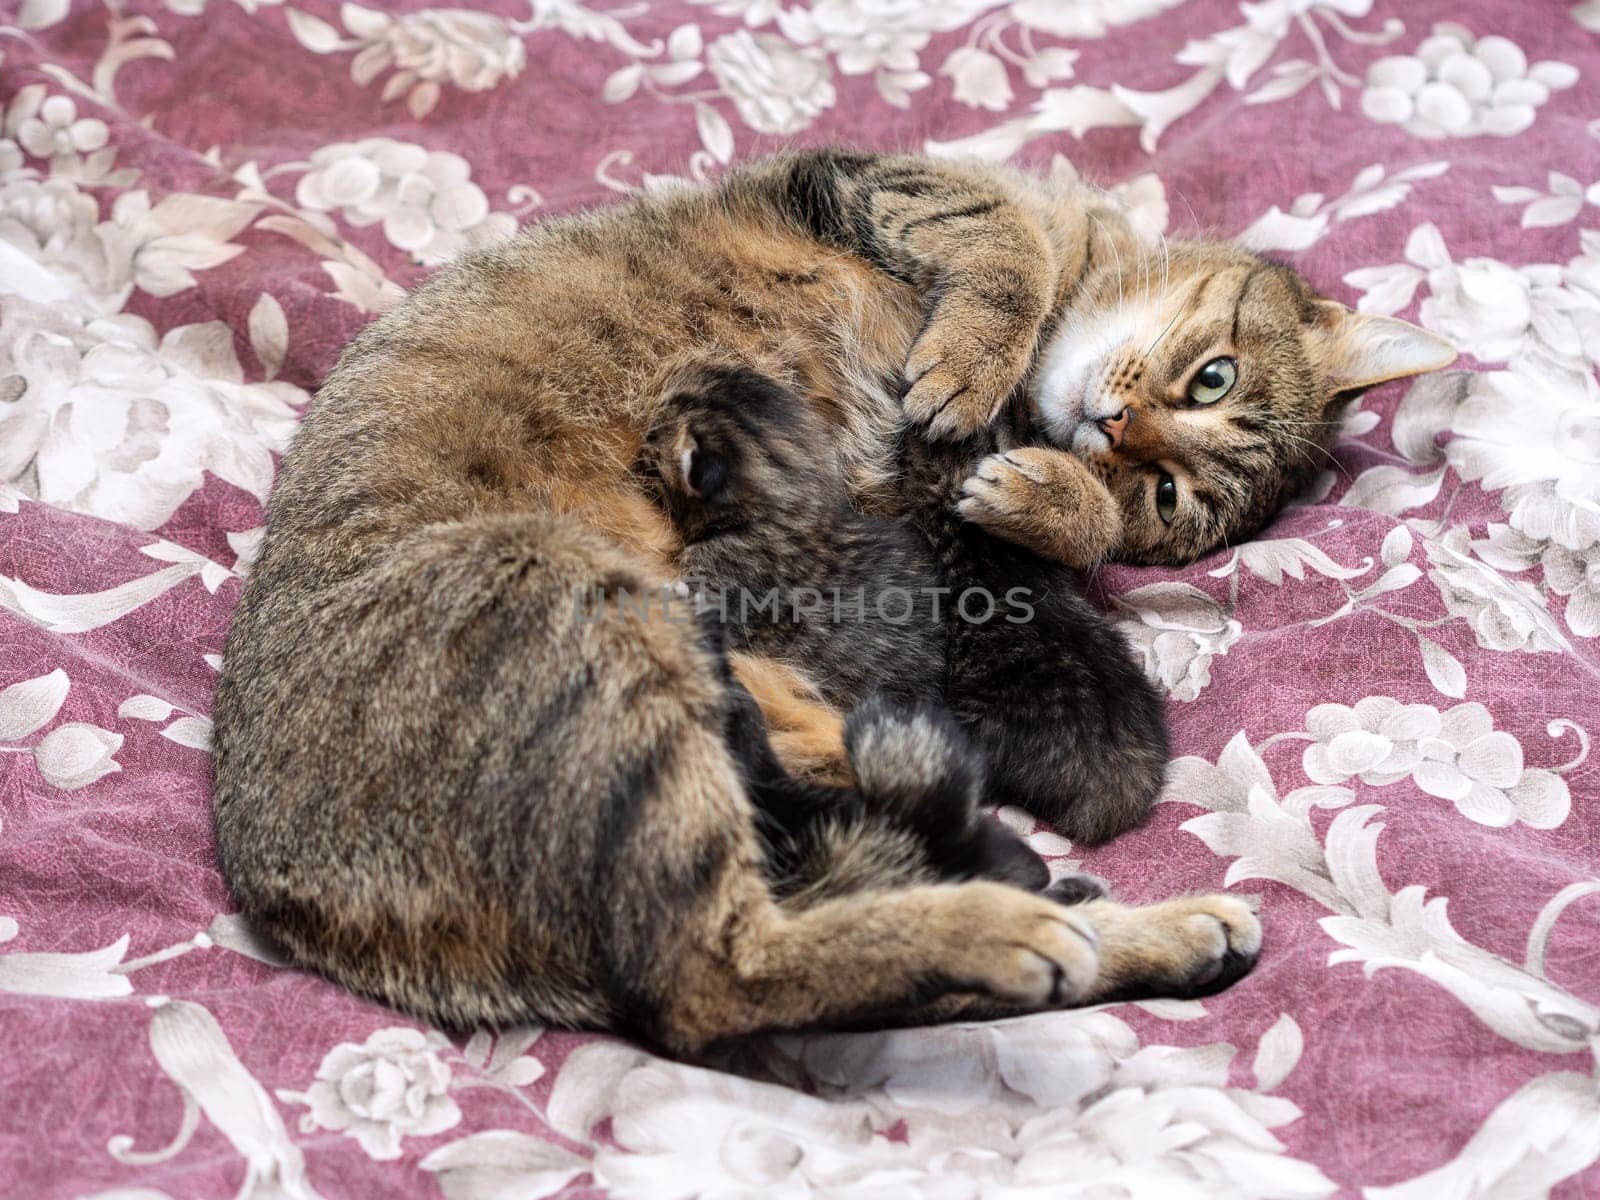 Beautiful Siberian cat with newborn kittens close-up. by Andre1ns